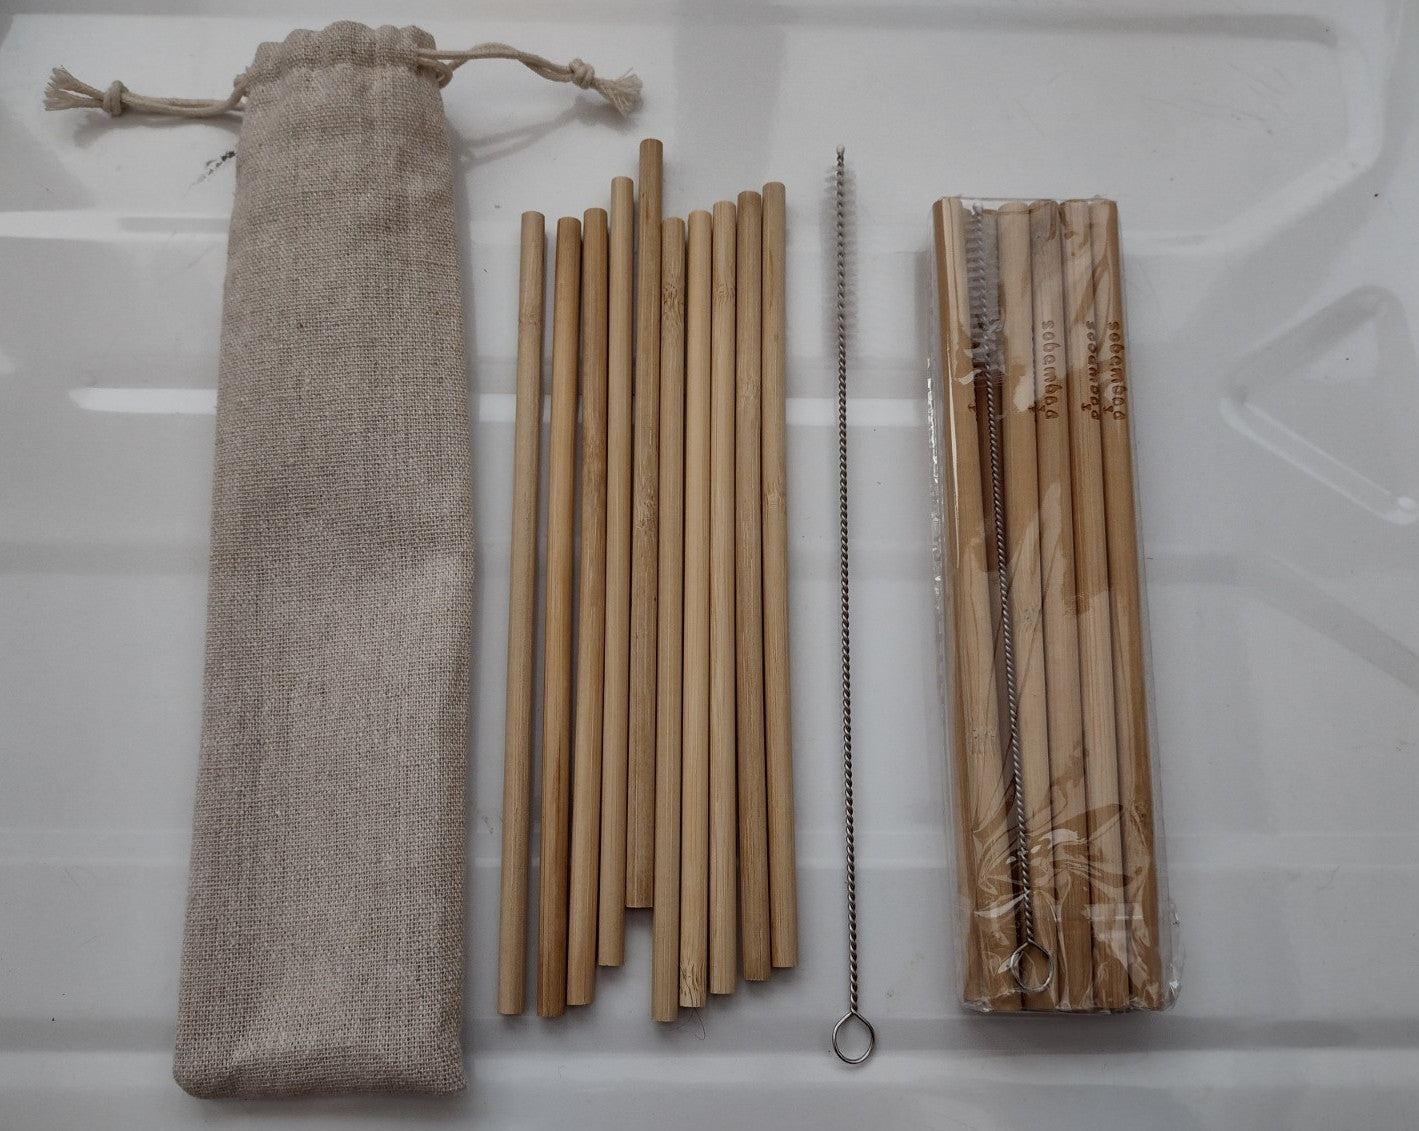 cloth bag and bamboo straws and a cleaning brush